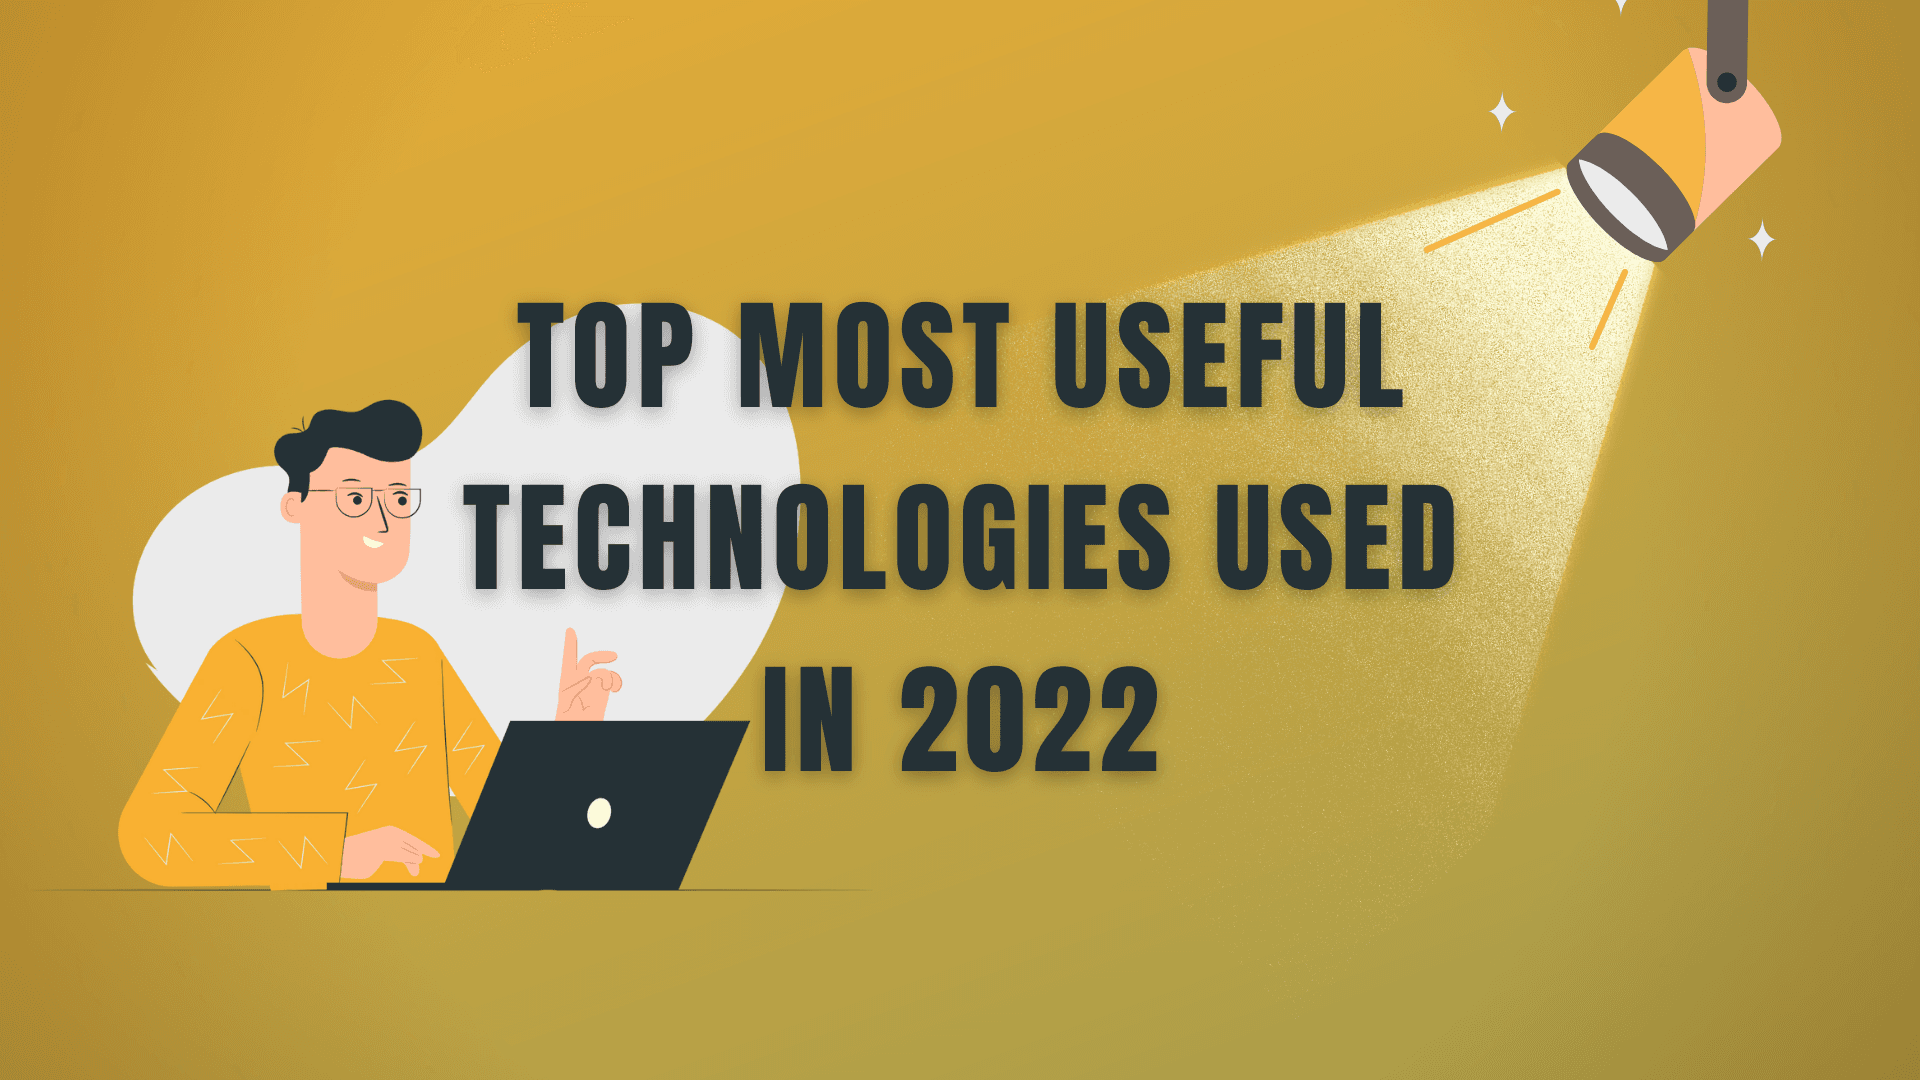 Top most useful technologies used in 2022